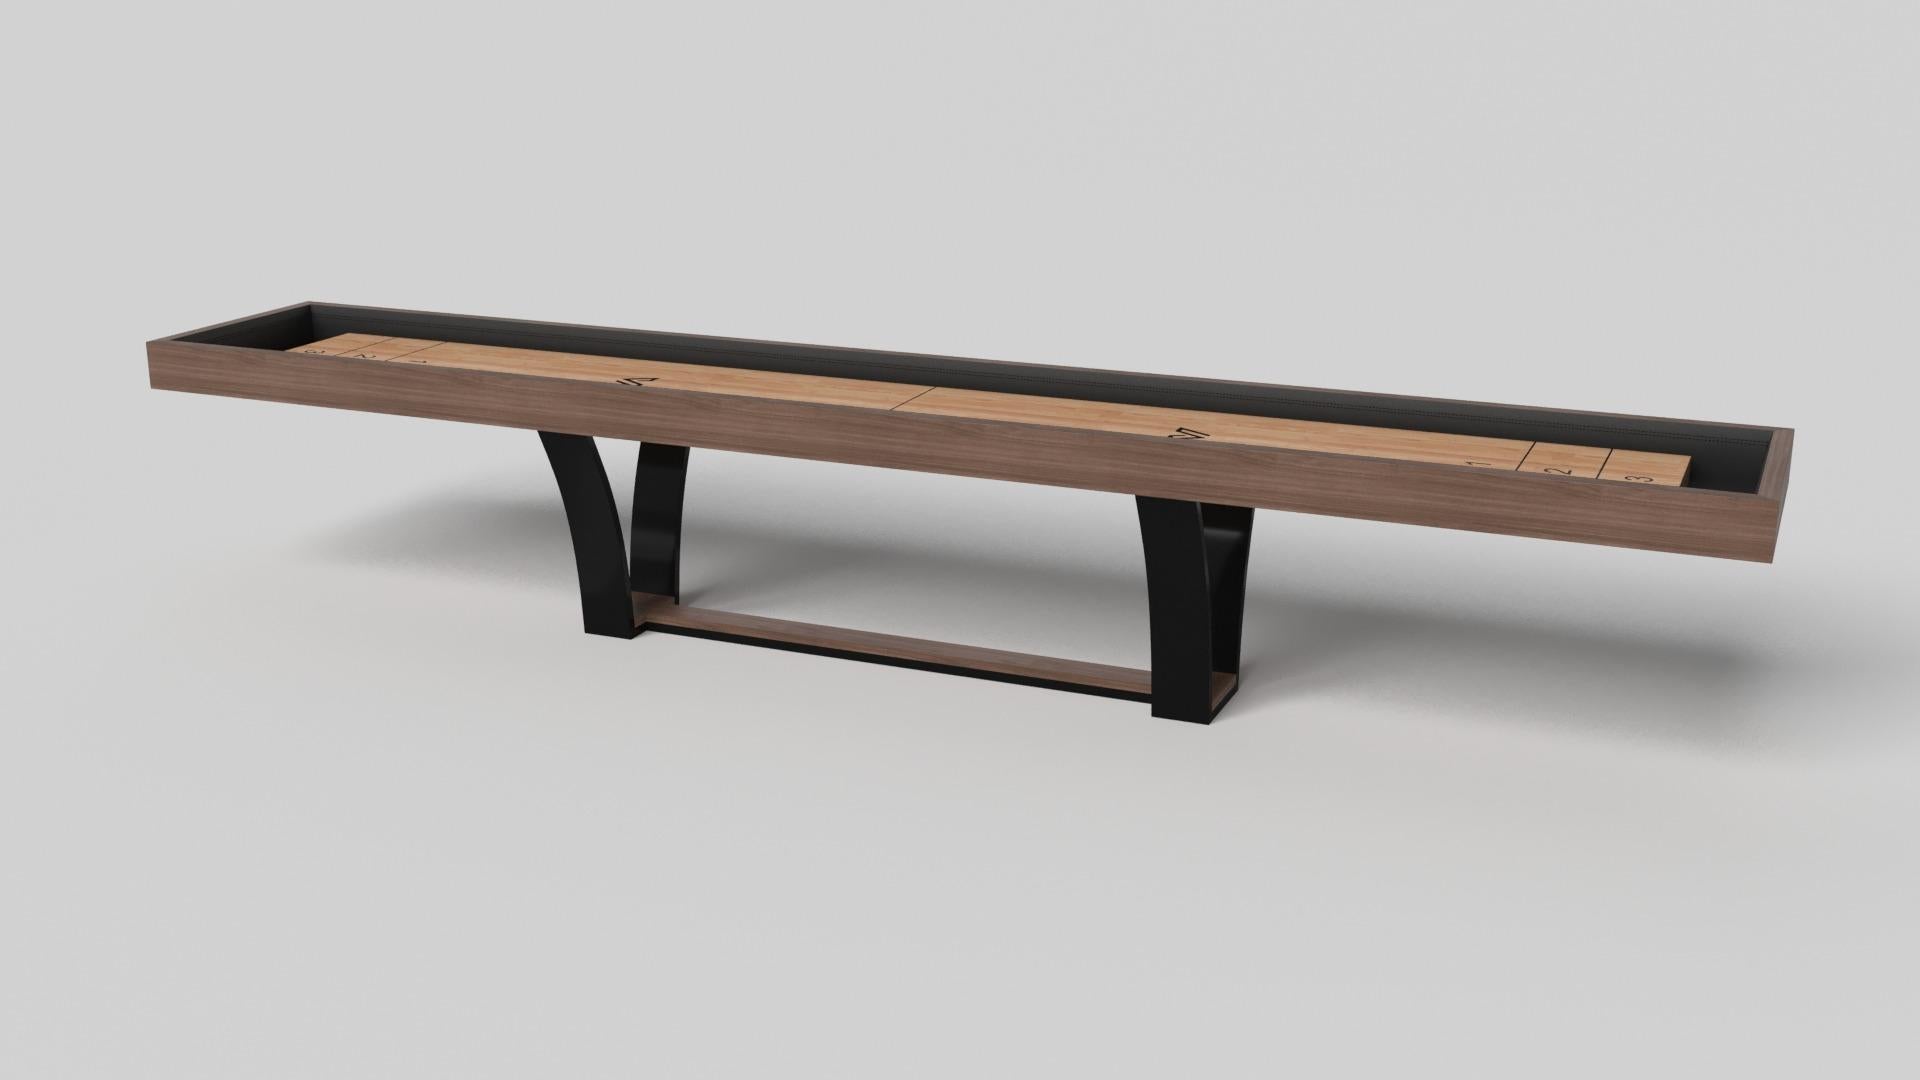 With an I-shaped metal base, slightly sloped metal legs, and a contrasting wood top, the Elite shuffleboard table exudes modern sophistication while evoking a sense of art deco design. This table is a confluence of style, made to meet today's